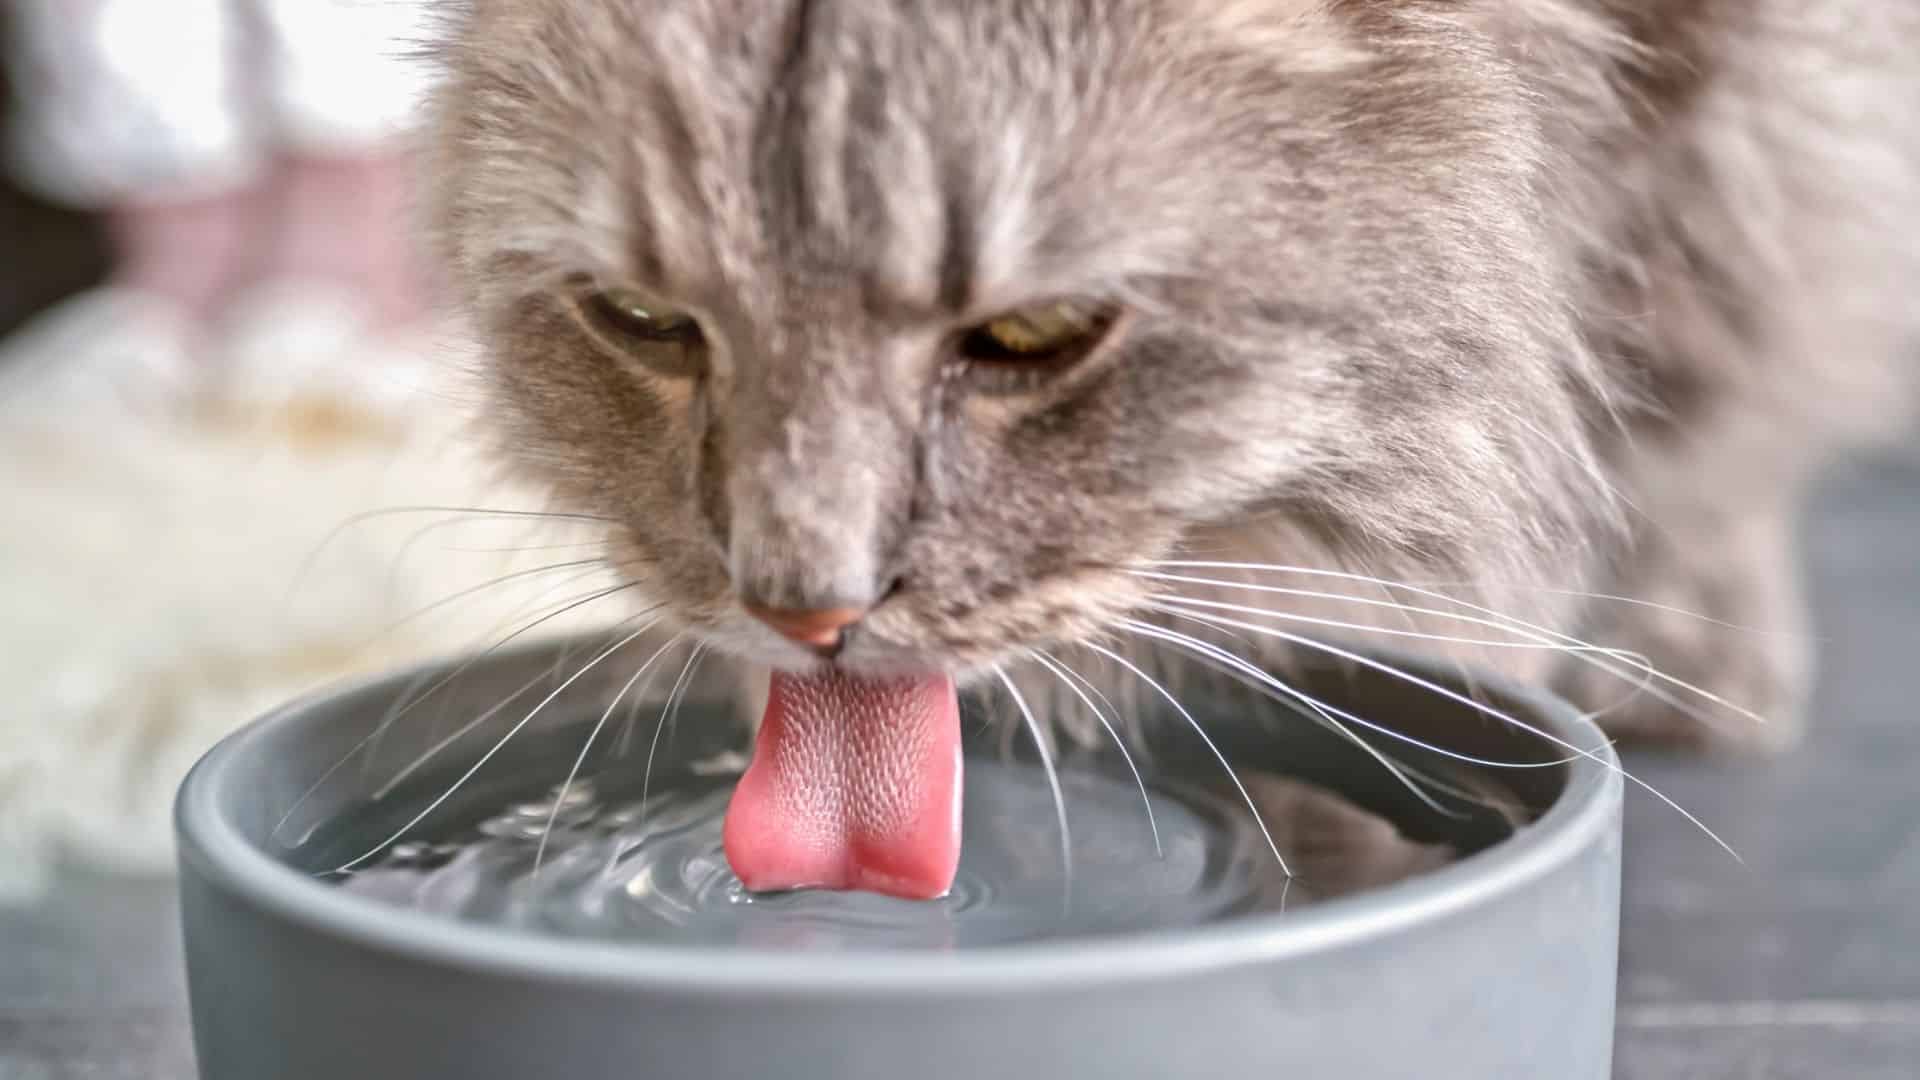 A slow drip of tuna water is beneficial for your cat